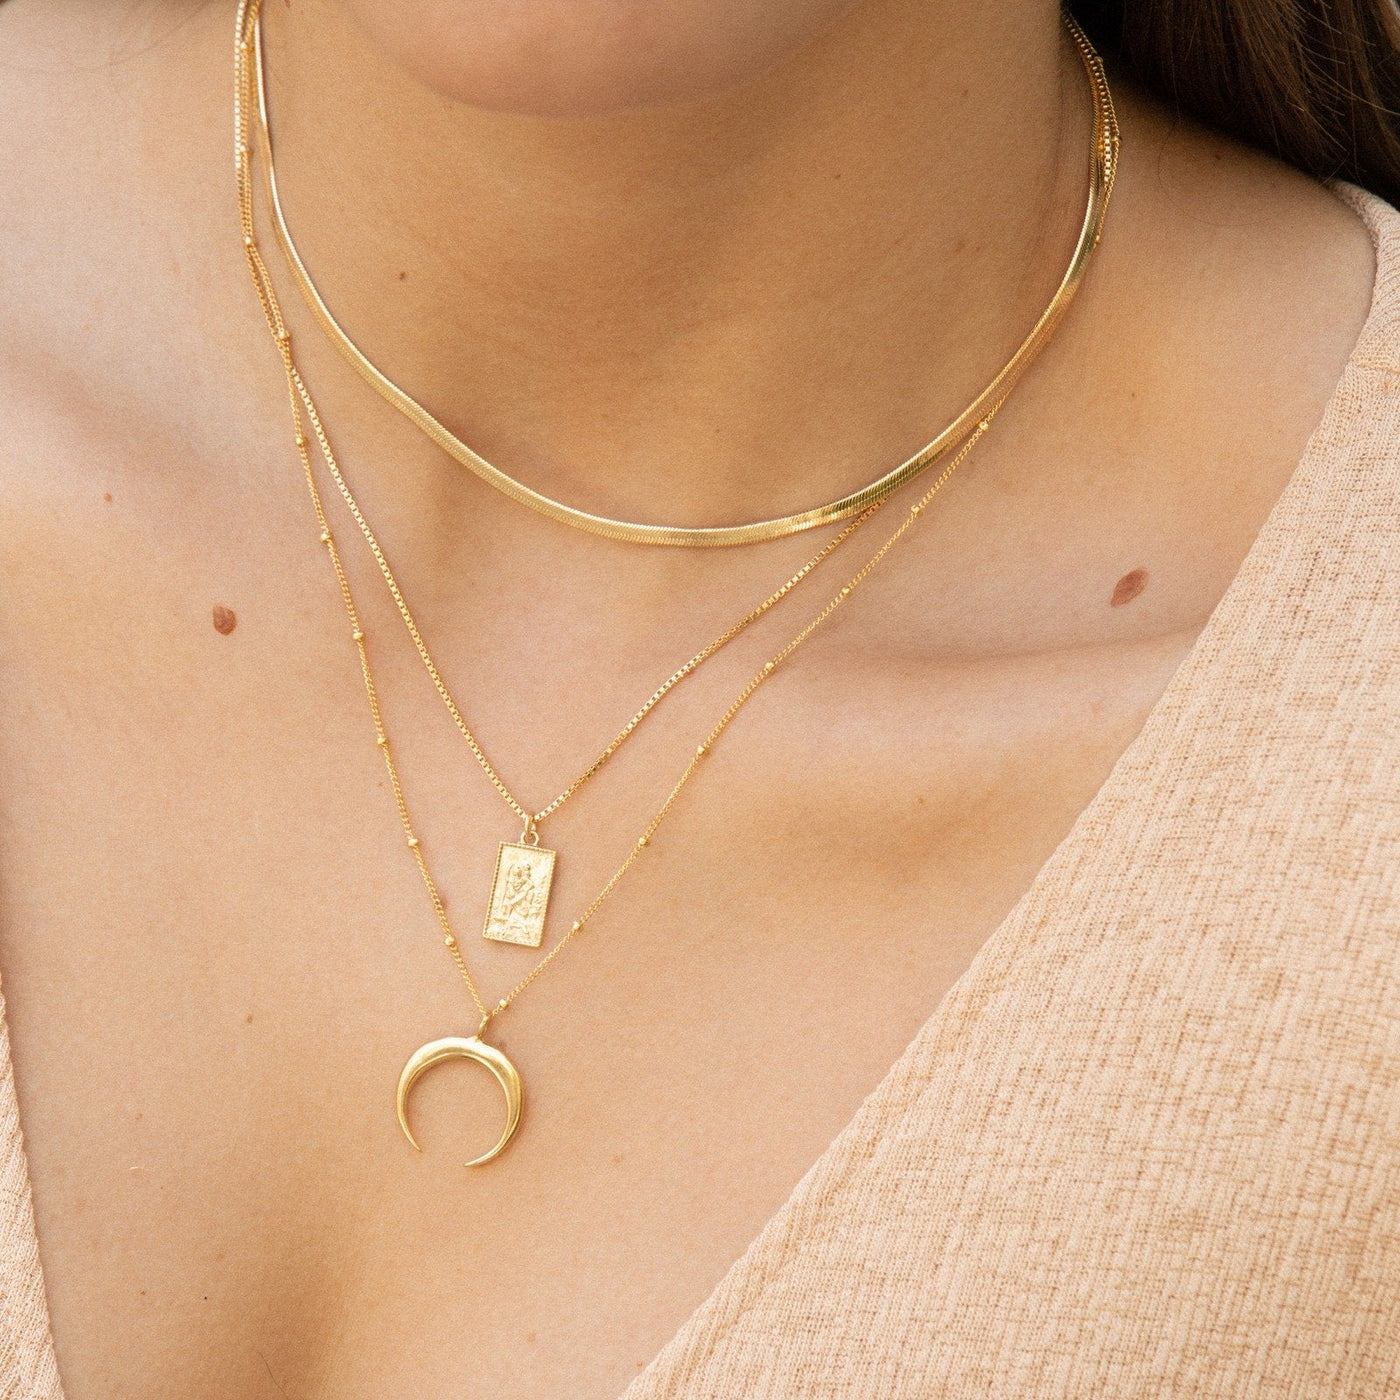 Rectangle Traveler's Necklace by Simple & Dainty Jewelry